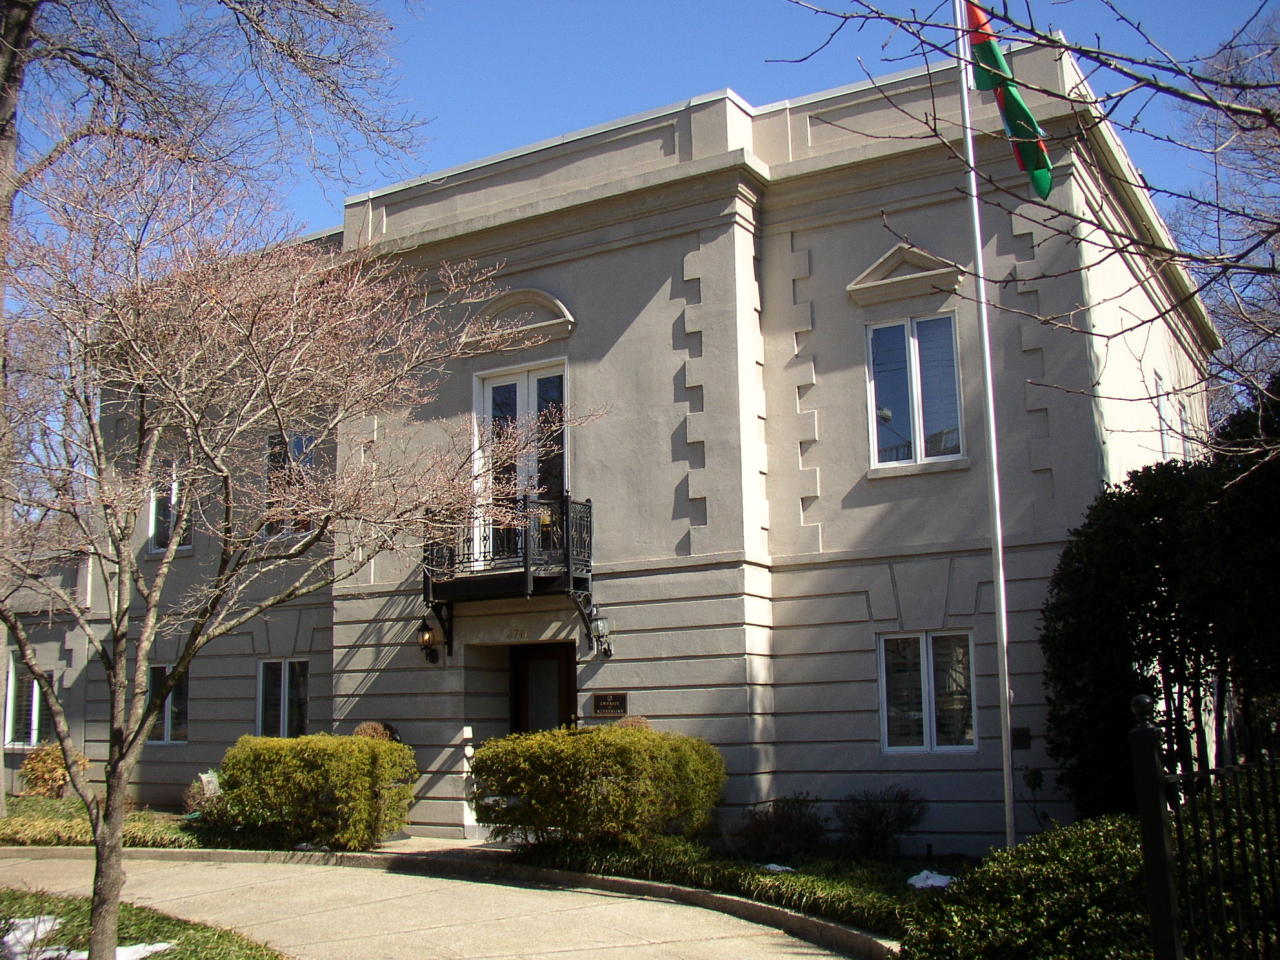 Azerbaijani embassy in US appeals to fellow citizens [PHOTO]